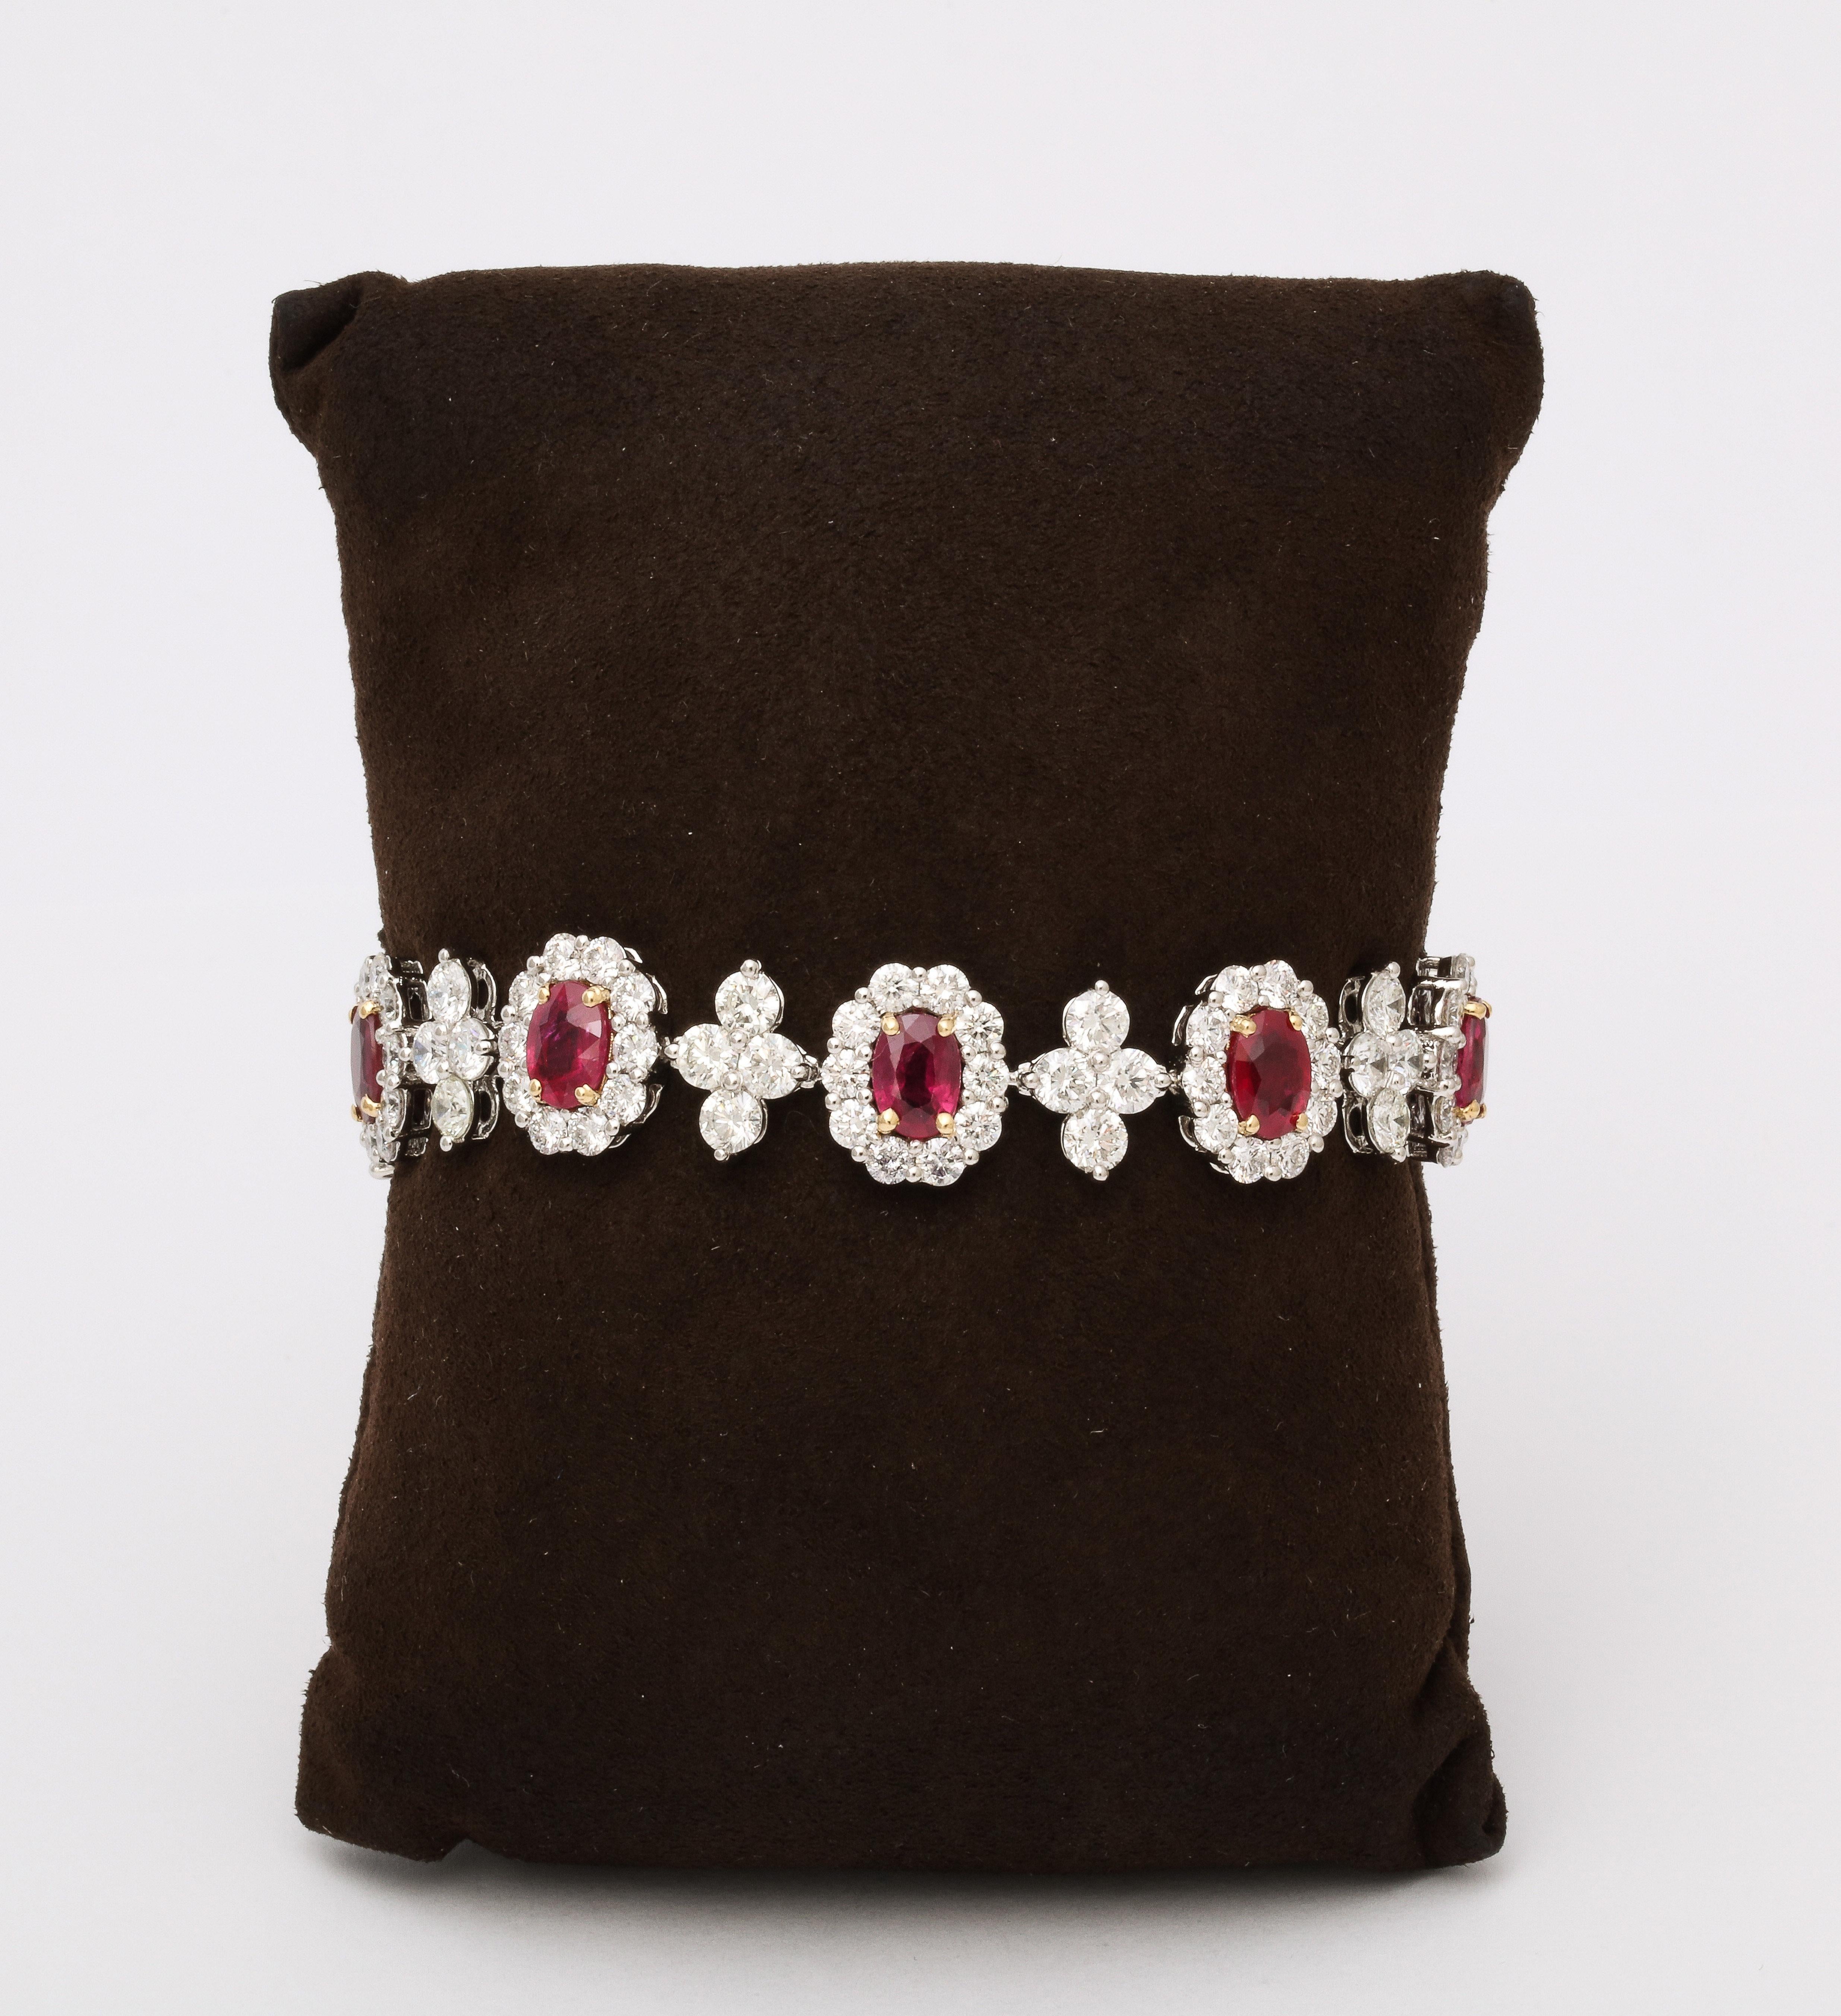 
A timeless design. 

9.20 carats of Fine Oval Ruby. 

14.56 carats of white round brilliant cut diamonds. 

Set in platinum 

7.25 inch length. 

A beautiful bracelet set with vibrant and bright Ruby. 